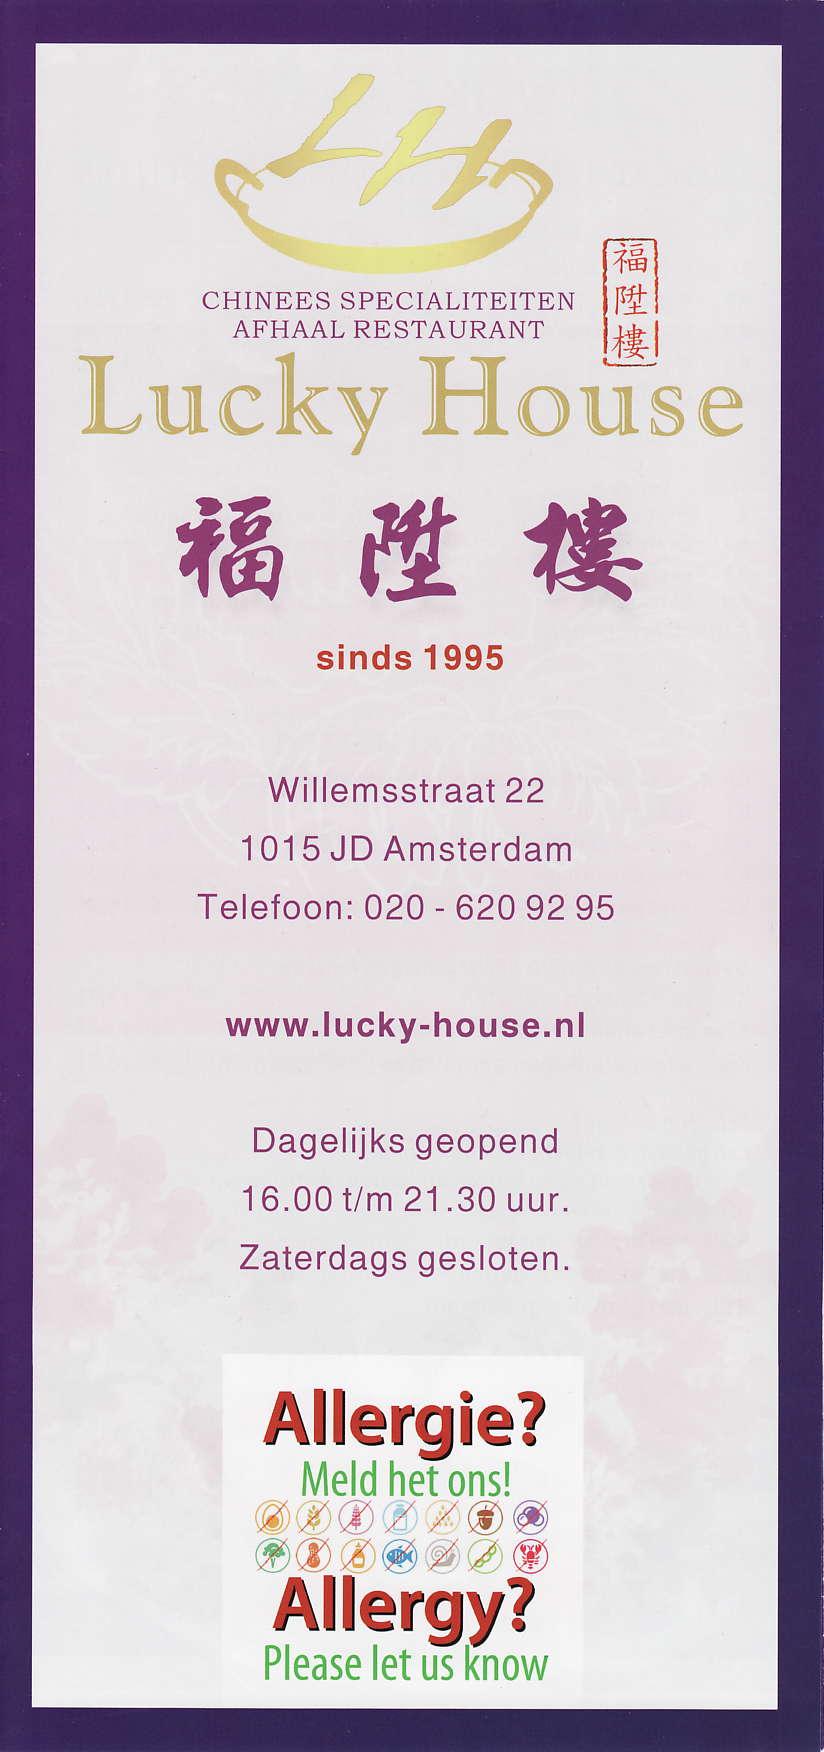 CHINEES SPECIALITEITEN AFHAAL RESTAURANT l+èl ia F!